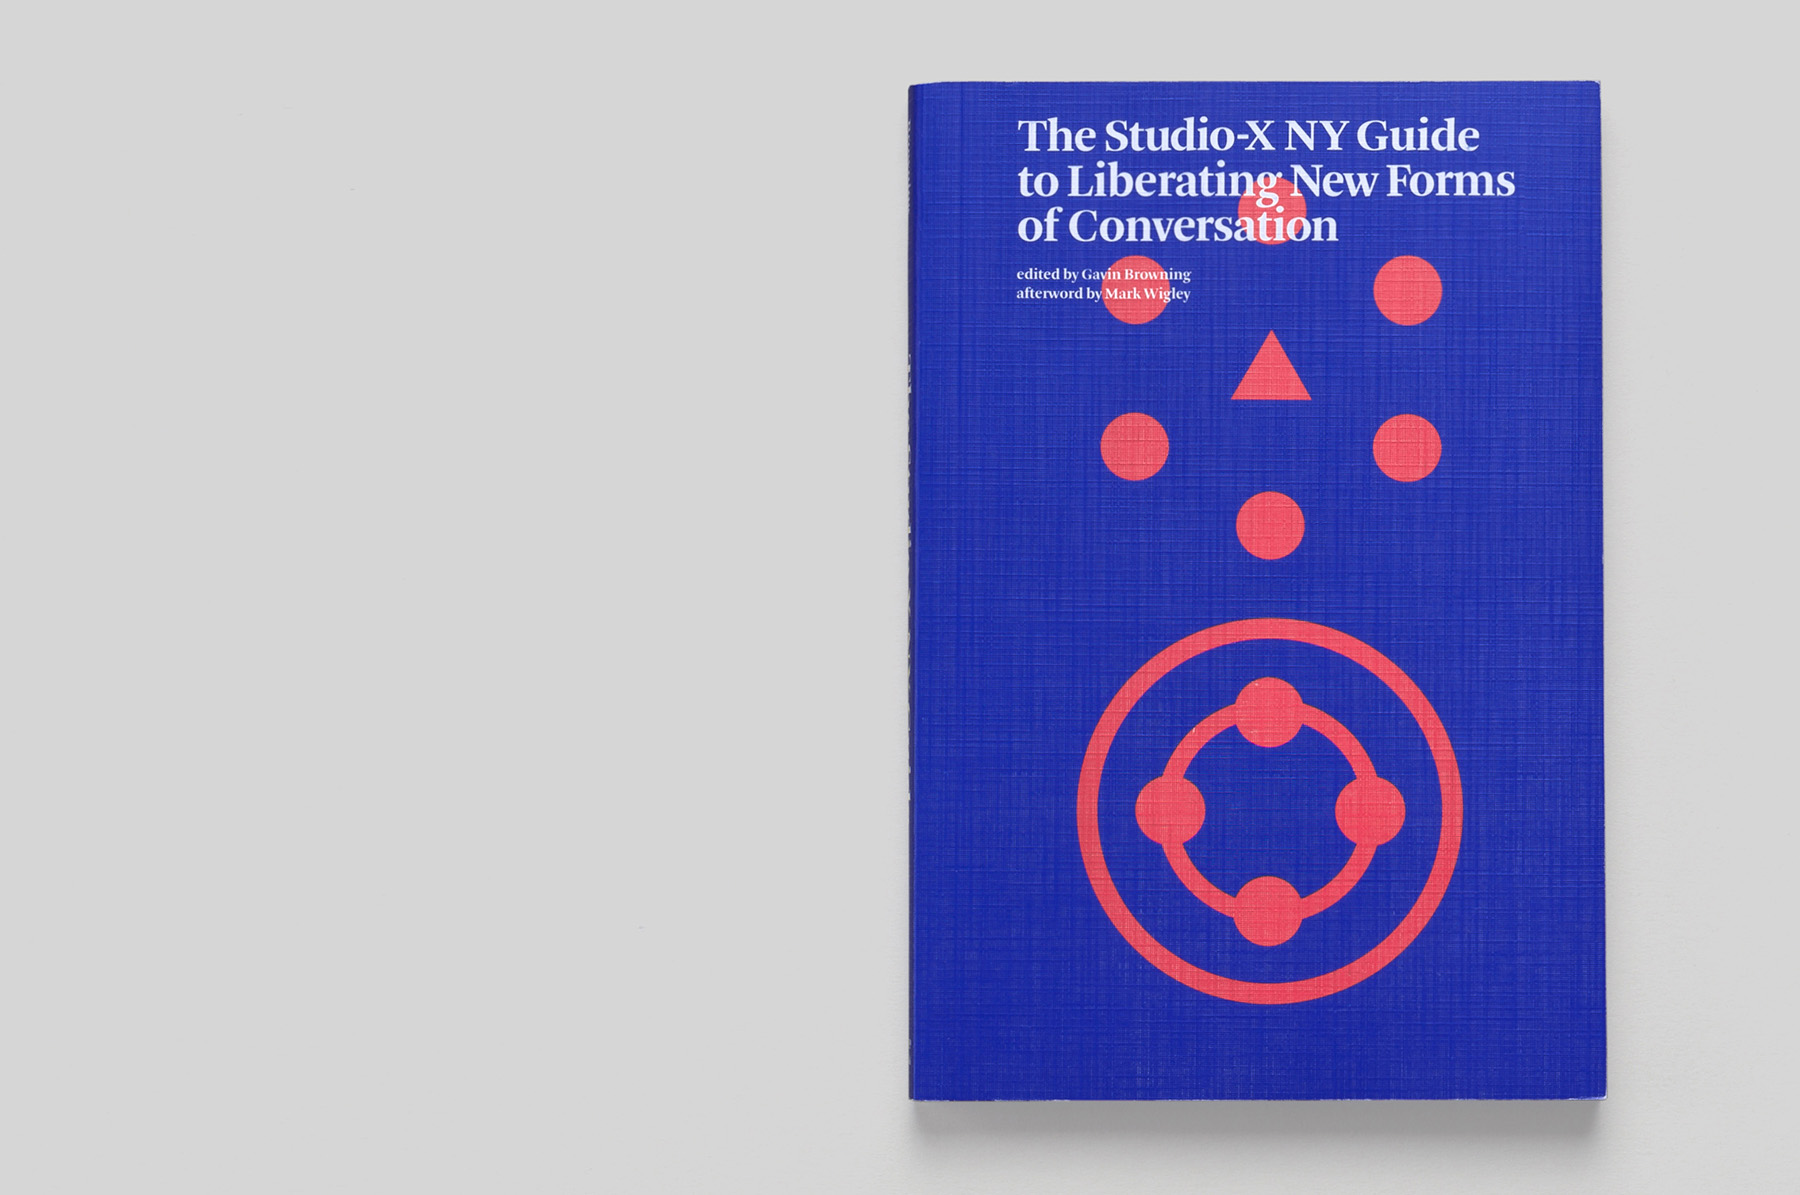 The Studio-X NY Guide to Liberating New Forms of Conversation - MTWTF